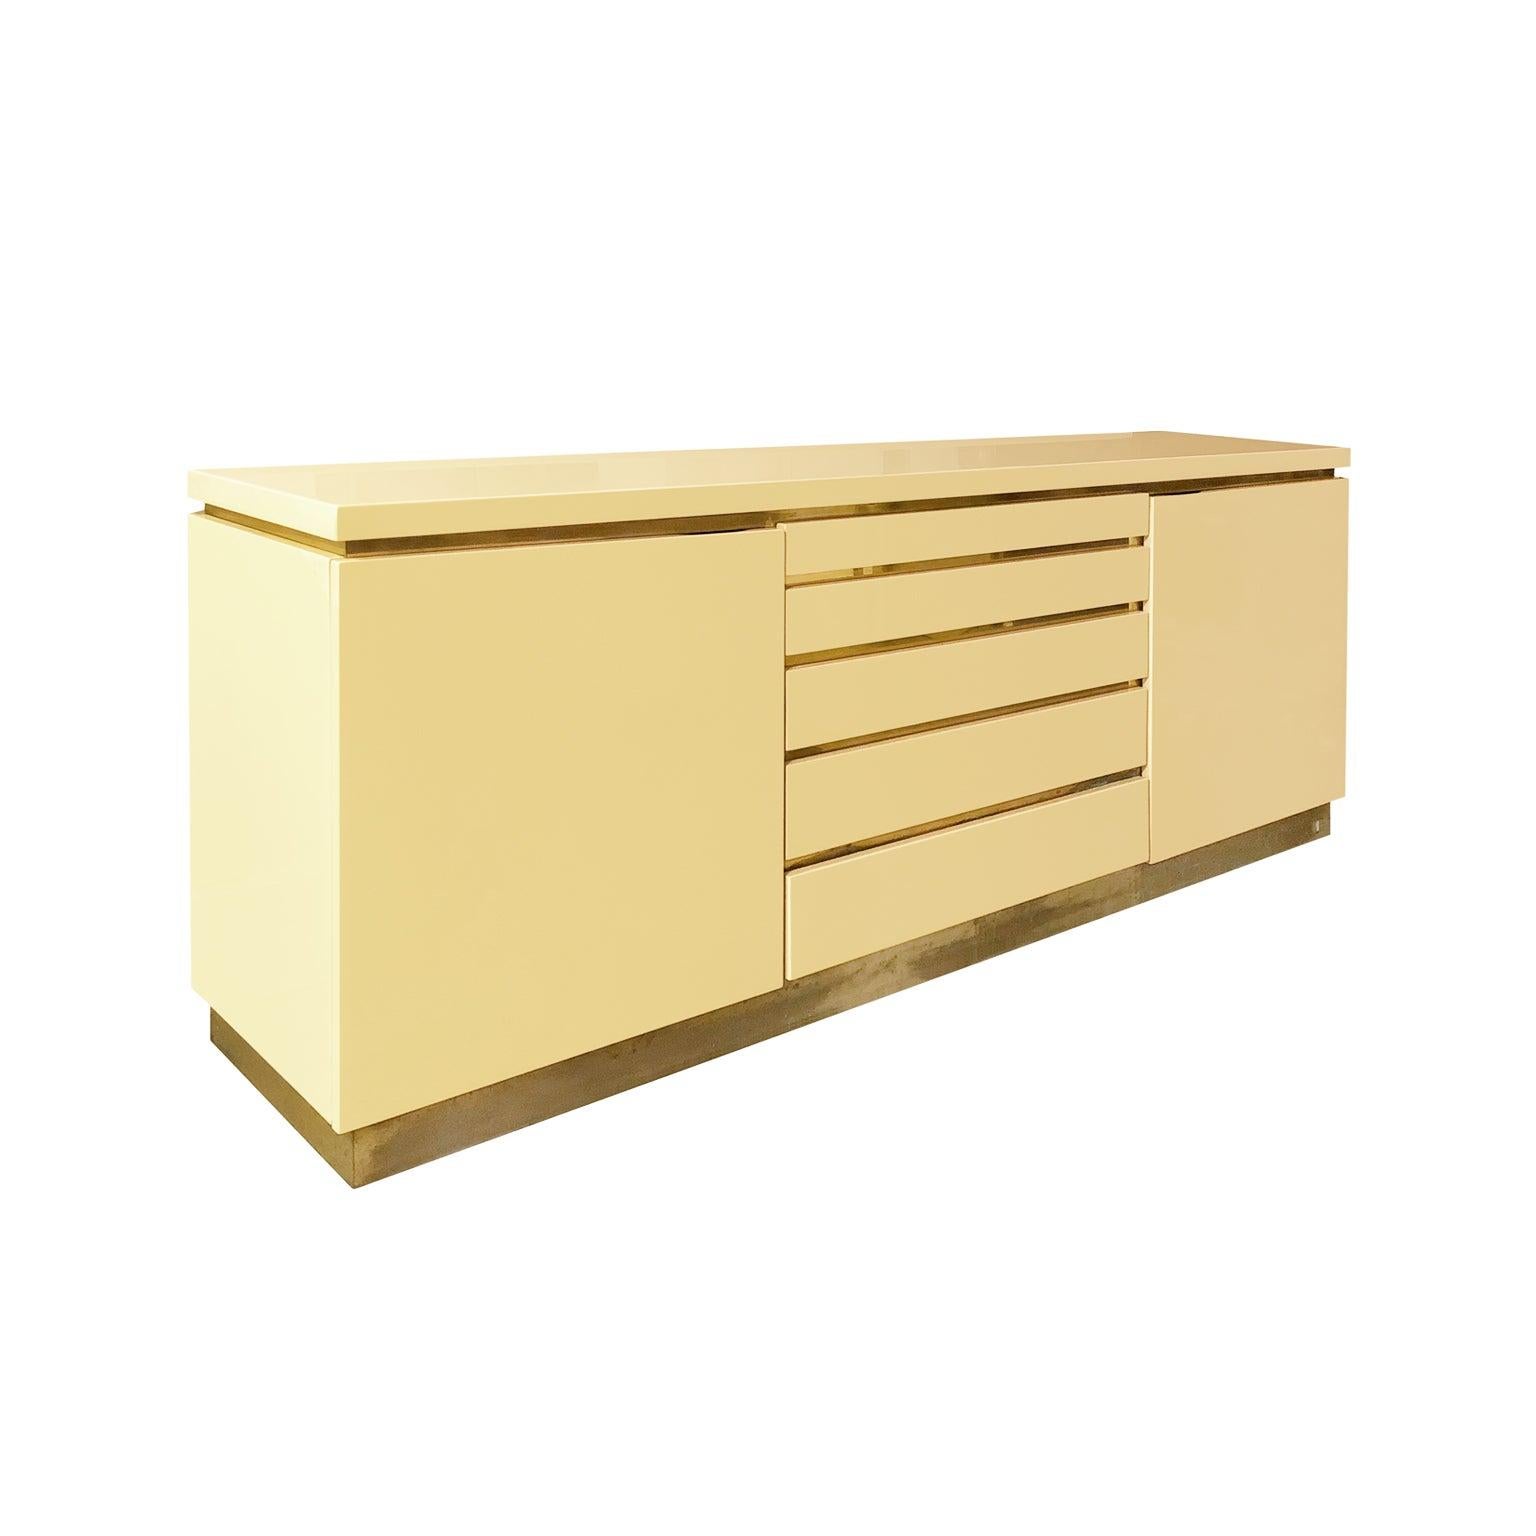 Rectangular ivory lacquer sideboard with brass details by Jean Claude Mahey. Signature on lower right corner, France, 1970s.
  